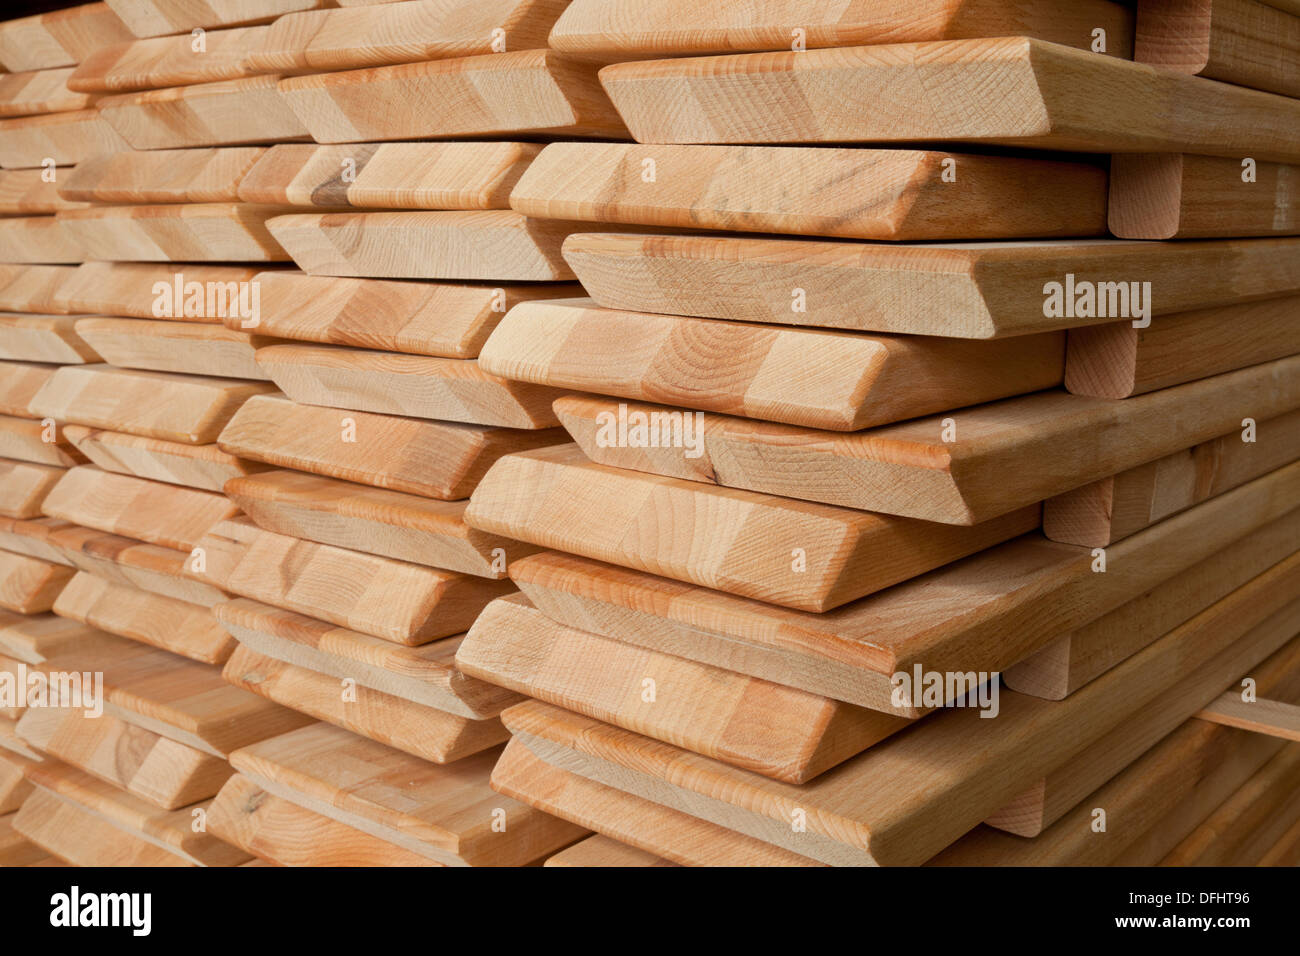 wooden beams stacked and processed Stock Photo